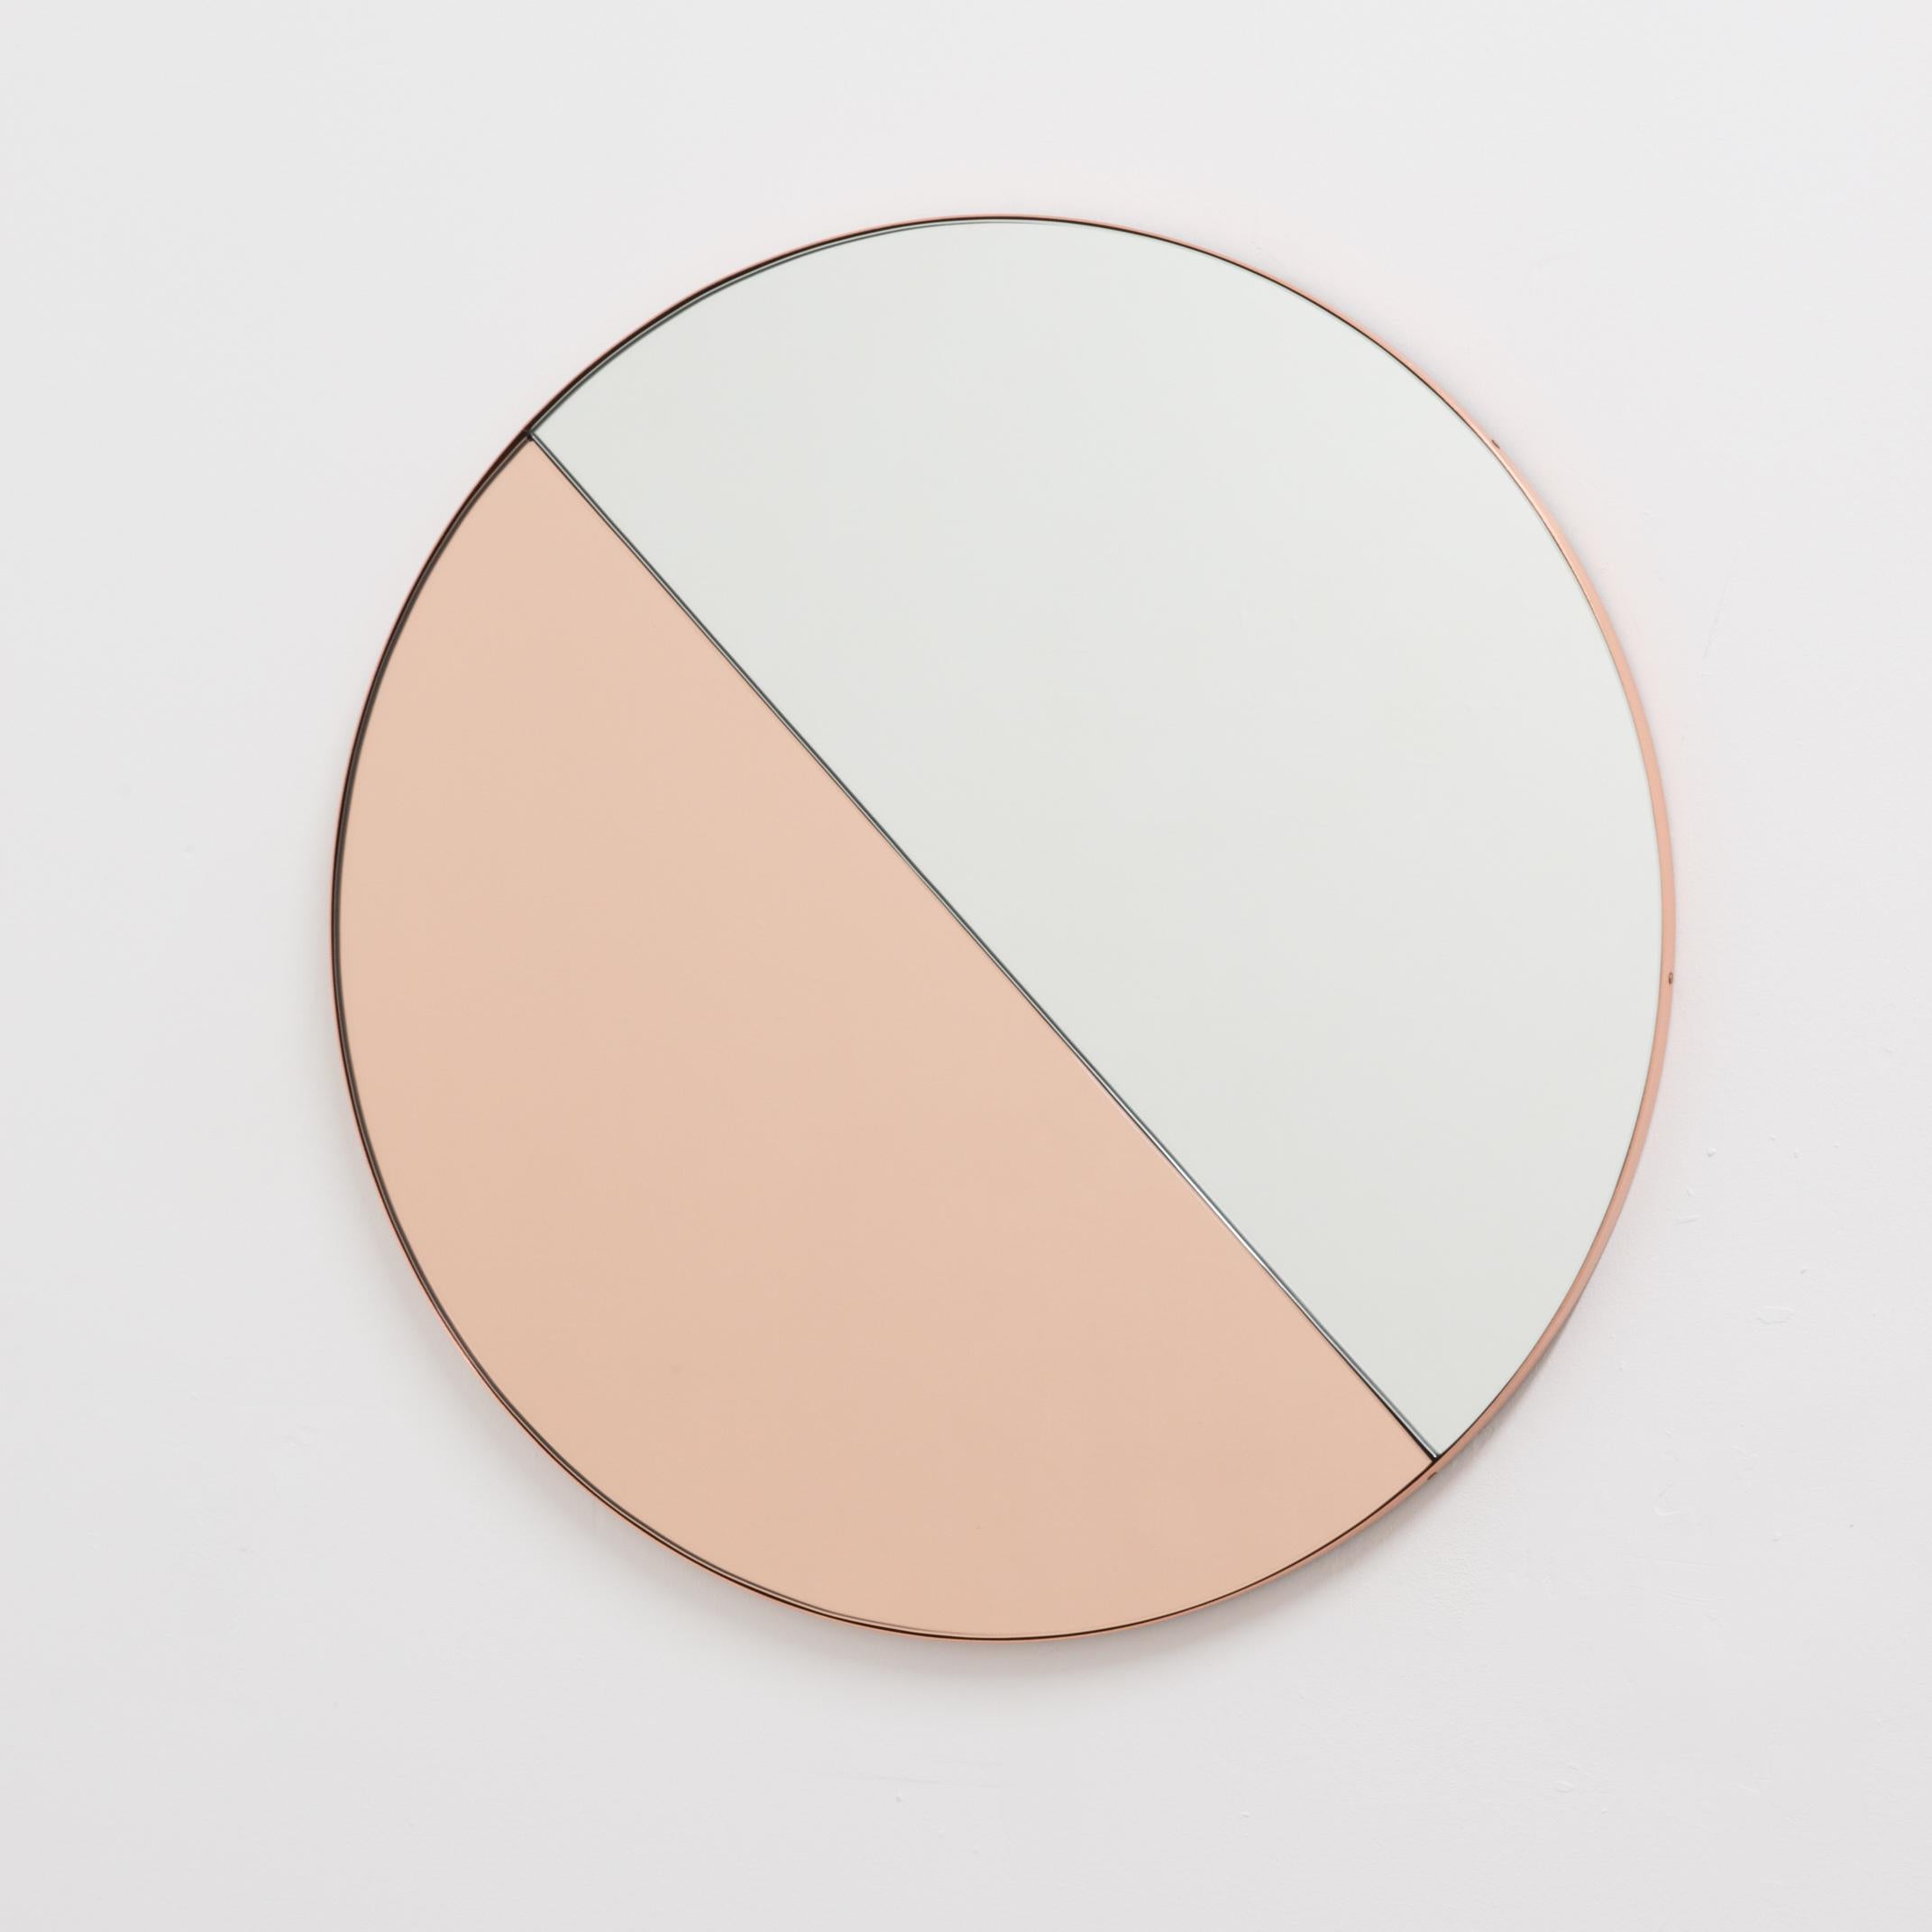 Bespoke Listing for Aurore Orbis dualis Rose gold+silver Brushed brass frame  6